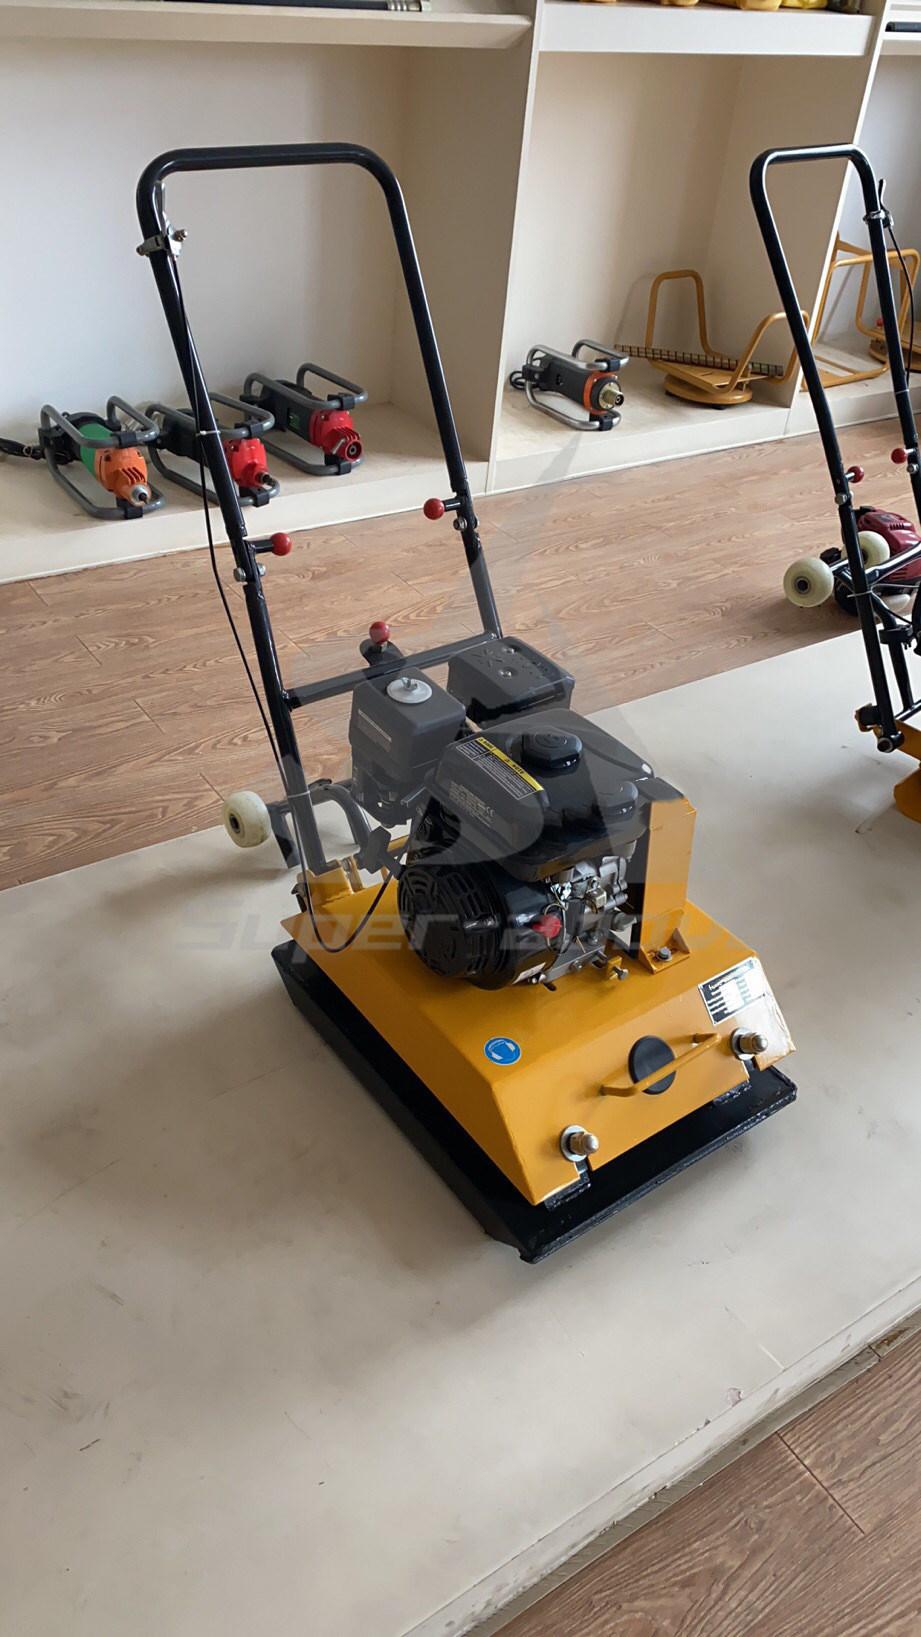 Vibrator Plate Compactor Compacting Machine for Sale